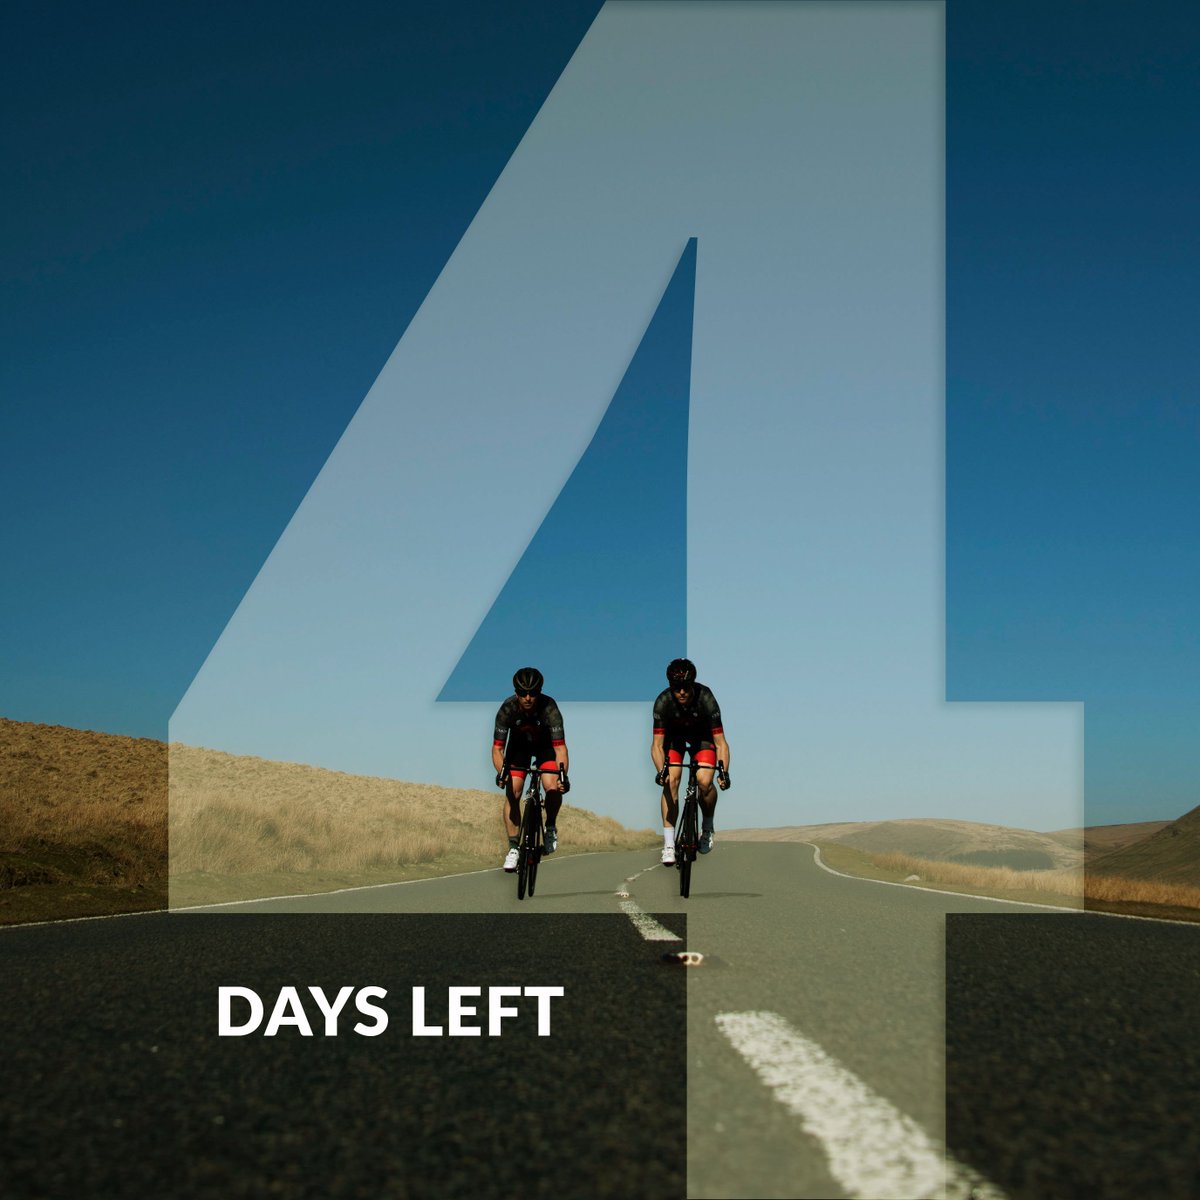 Only 4 days to go! Grab yours before they're gone. nfto.com @cryeprecision @level_peaks @oakley @Velo1Shop #cycling #cyclingkit #nfto #fitness #workout #multicam #motivation